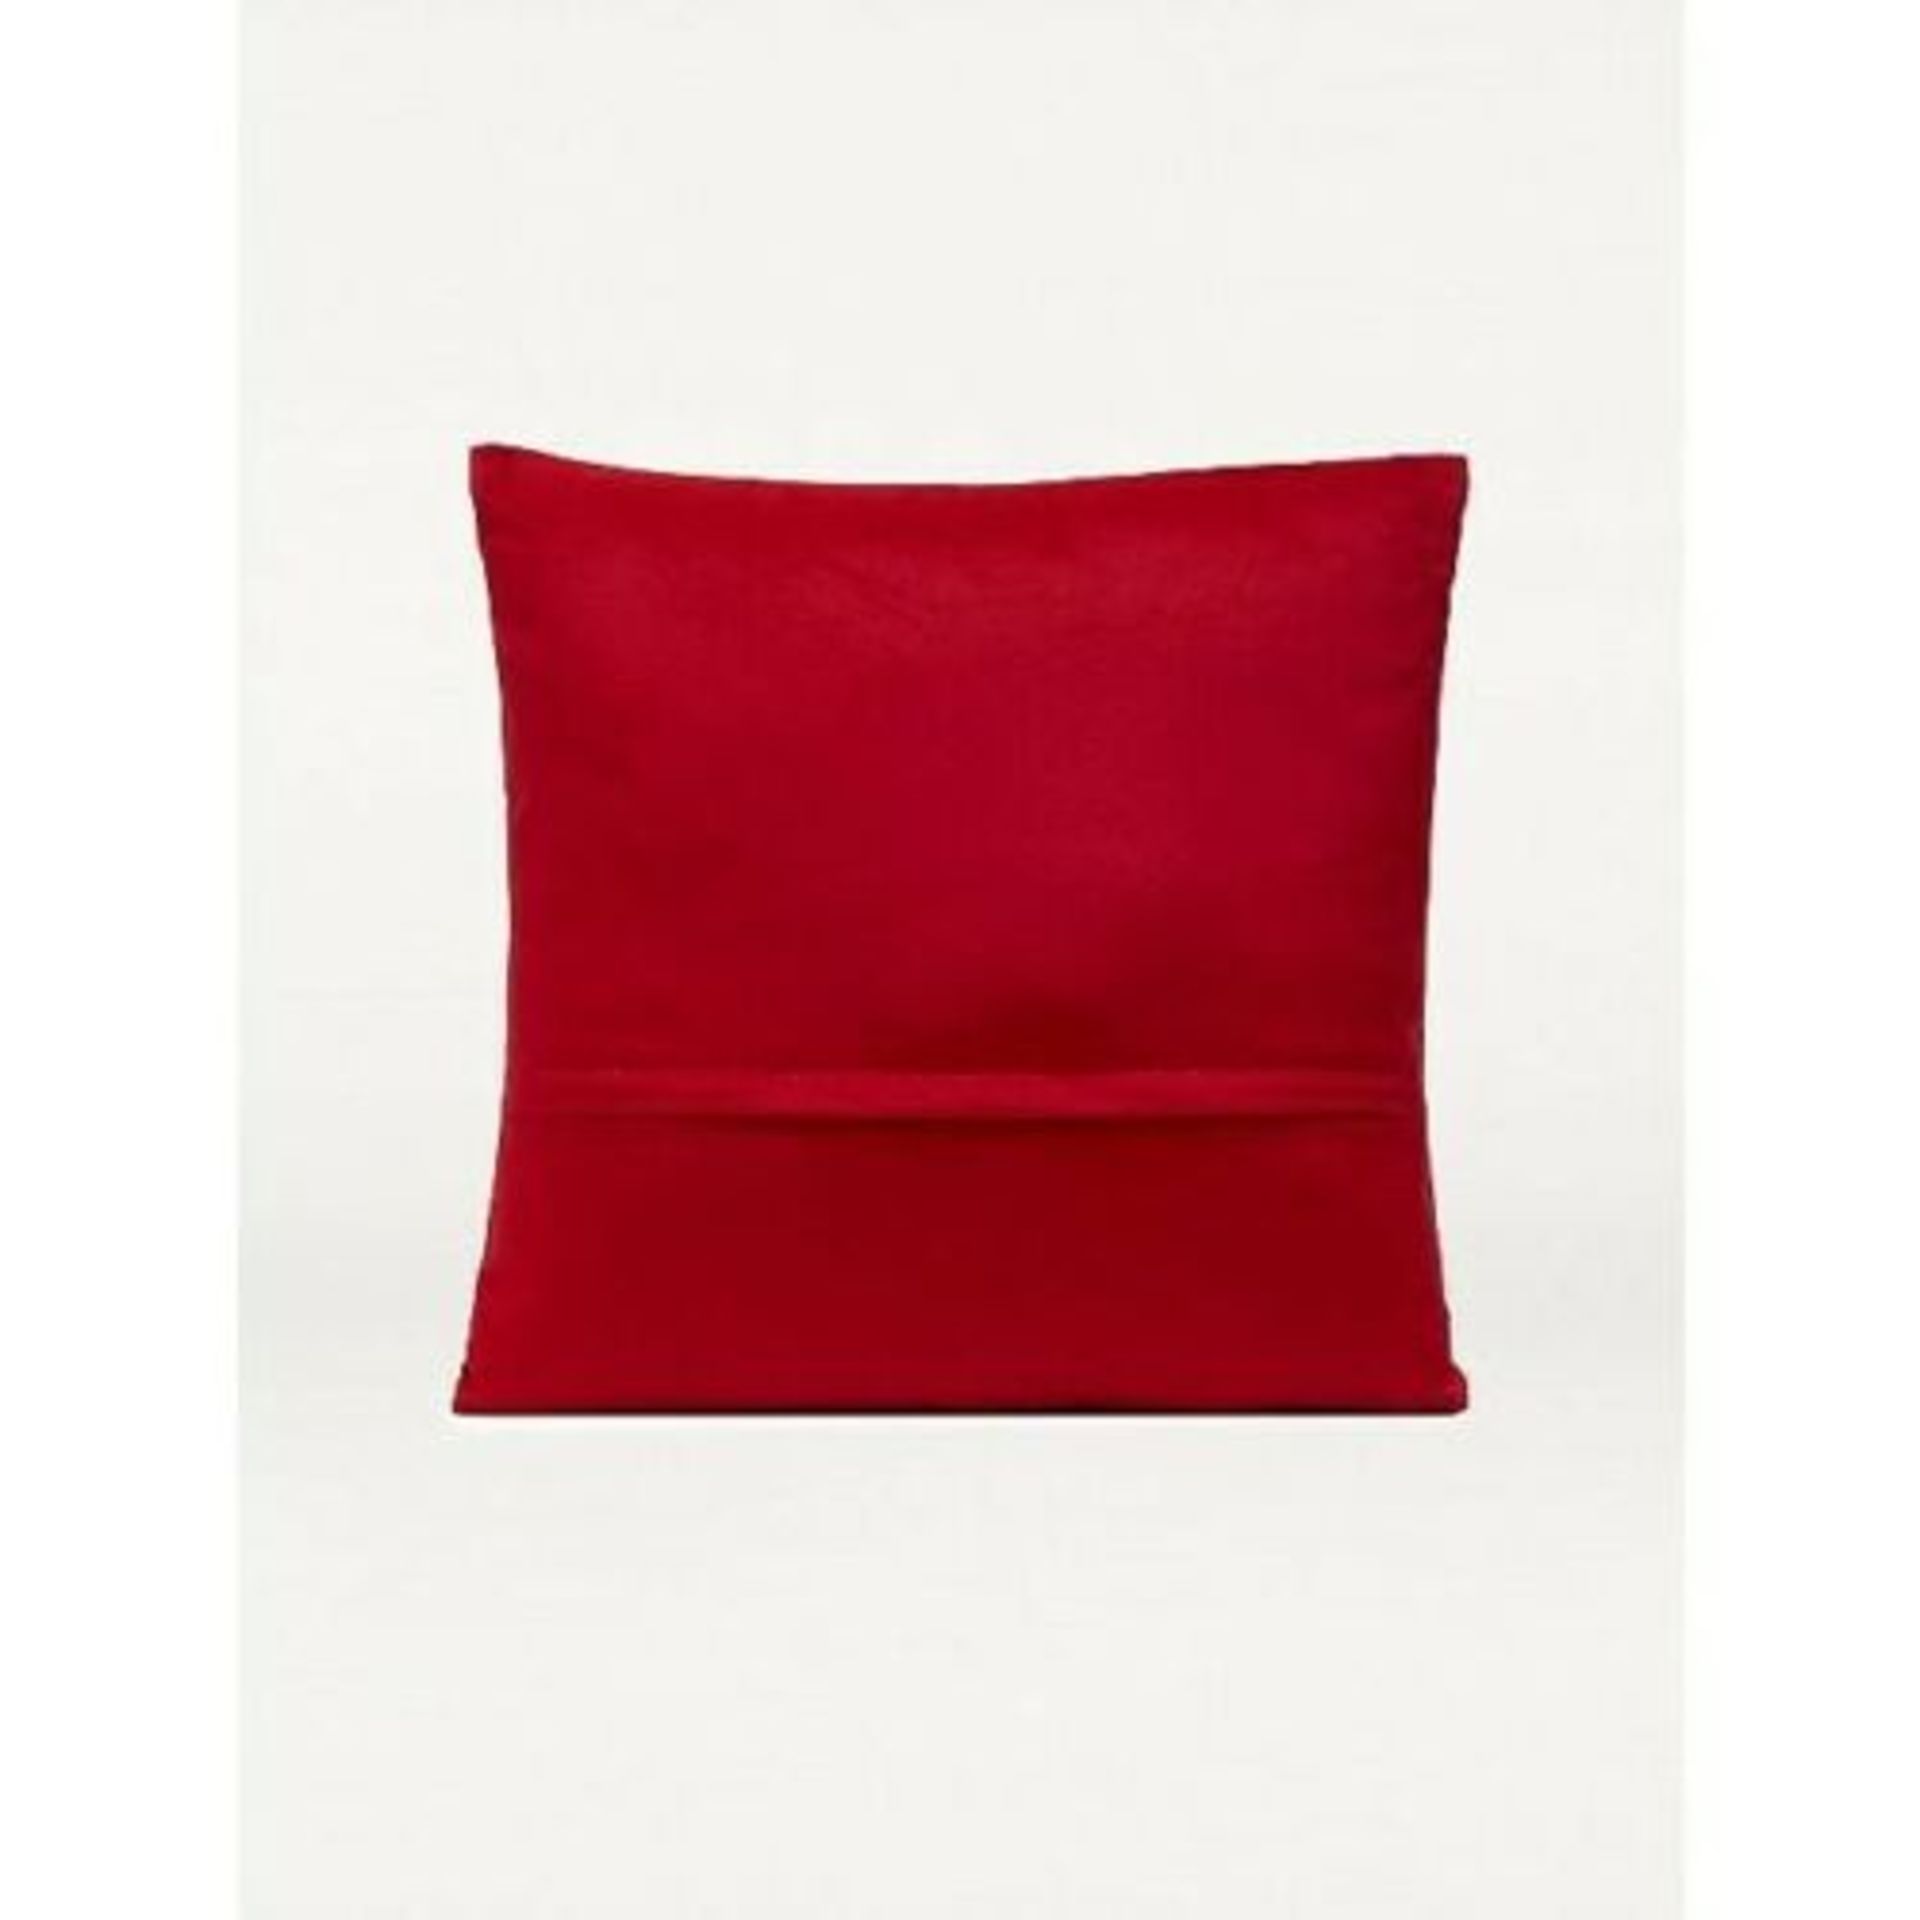 96x Super-Soft Christmas Cushions RRP £959 - Image 3 of 3